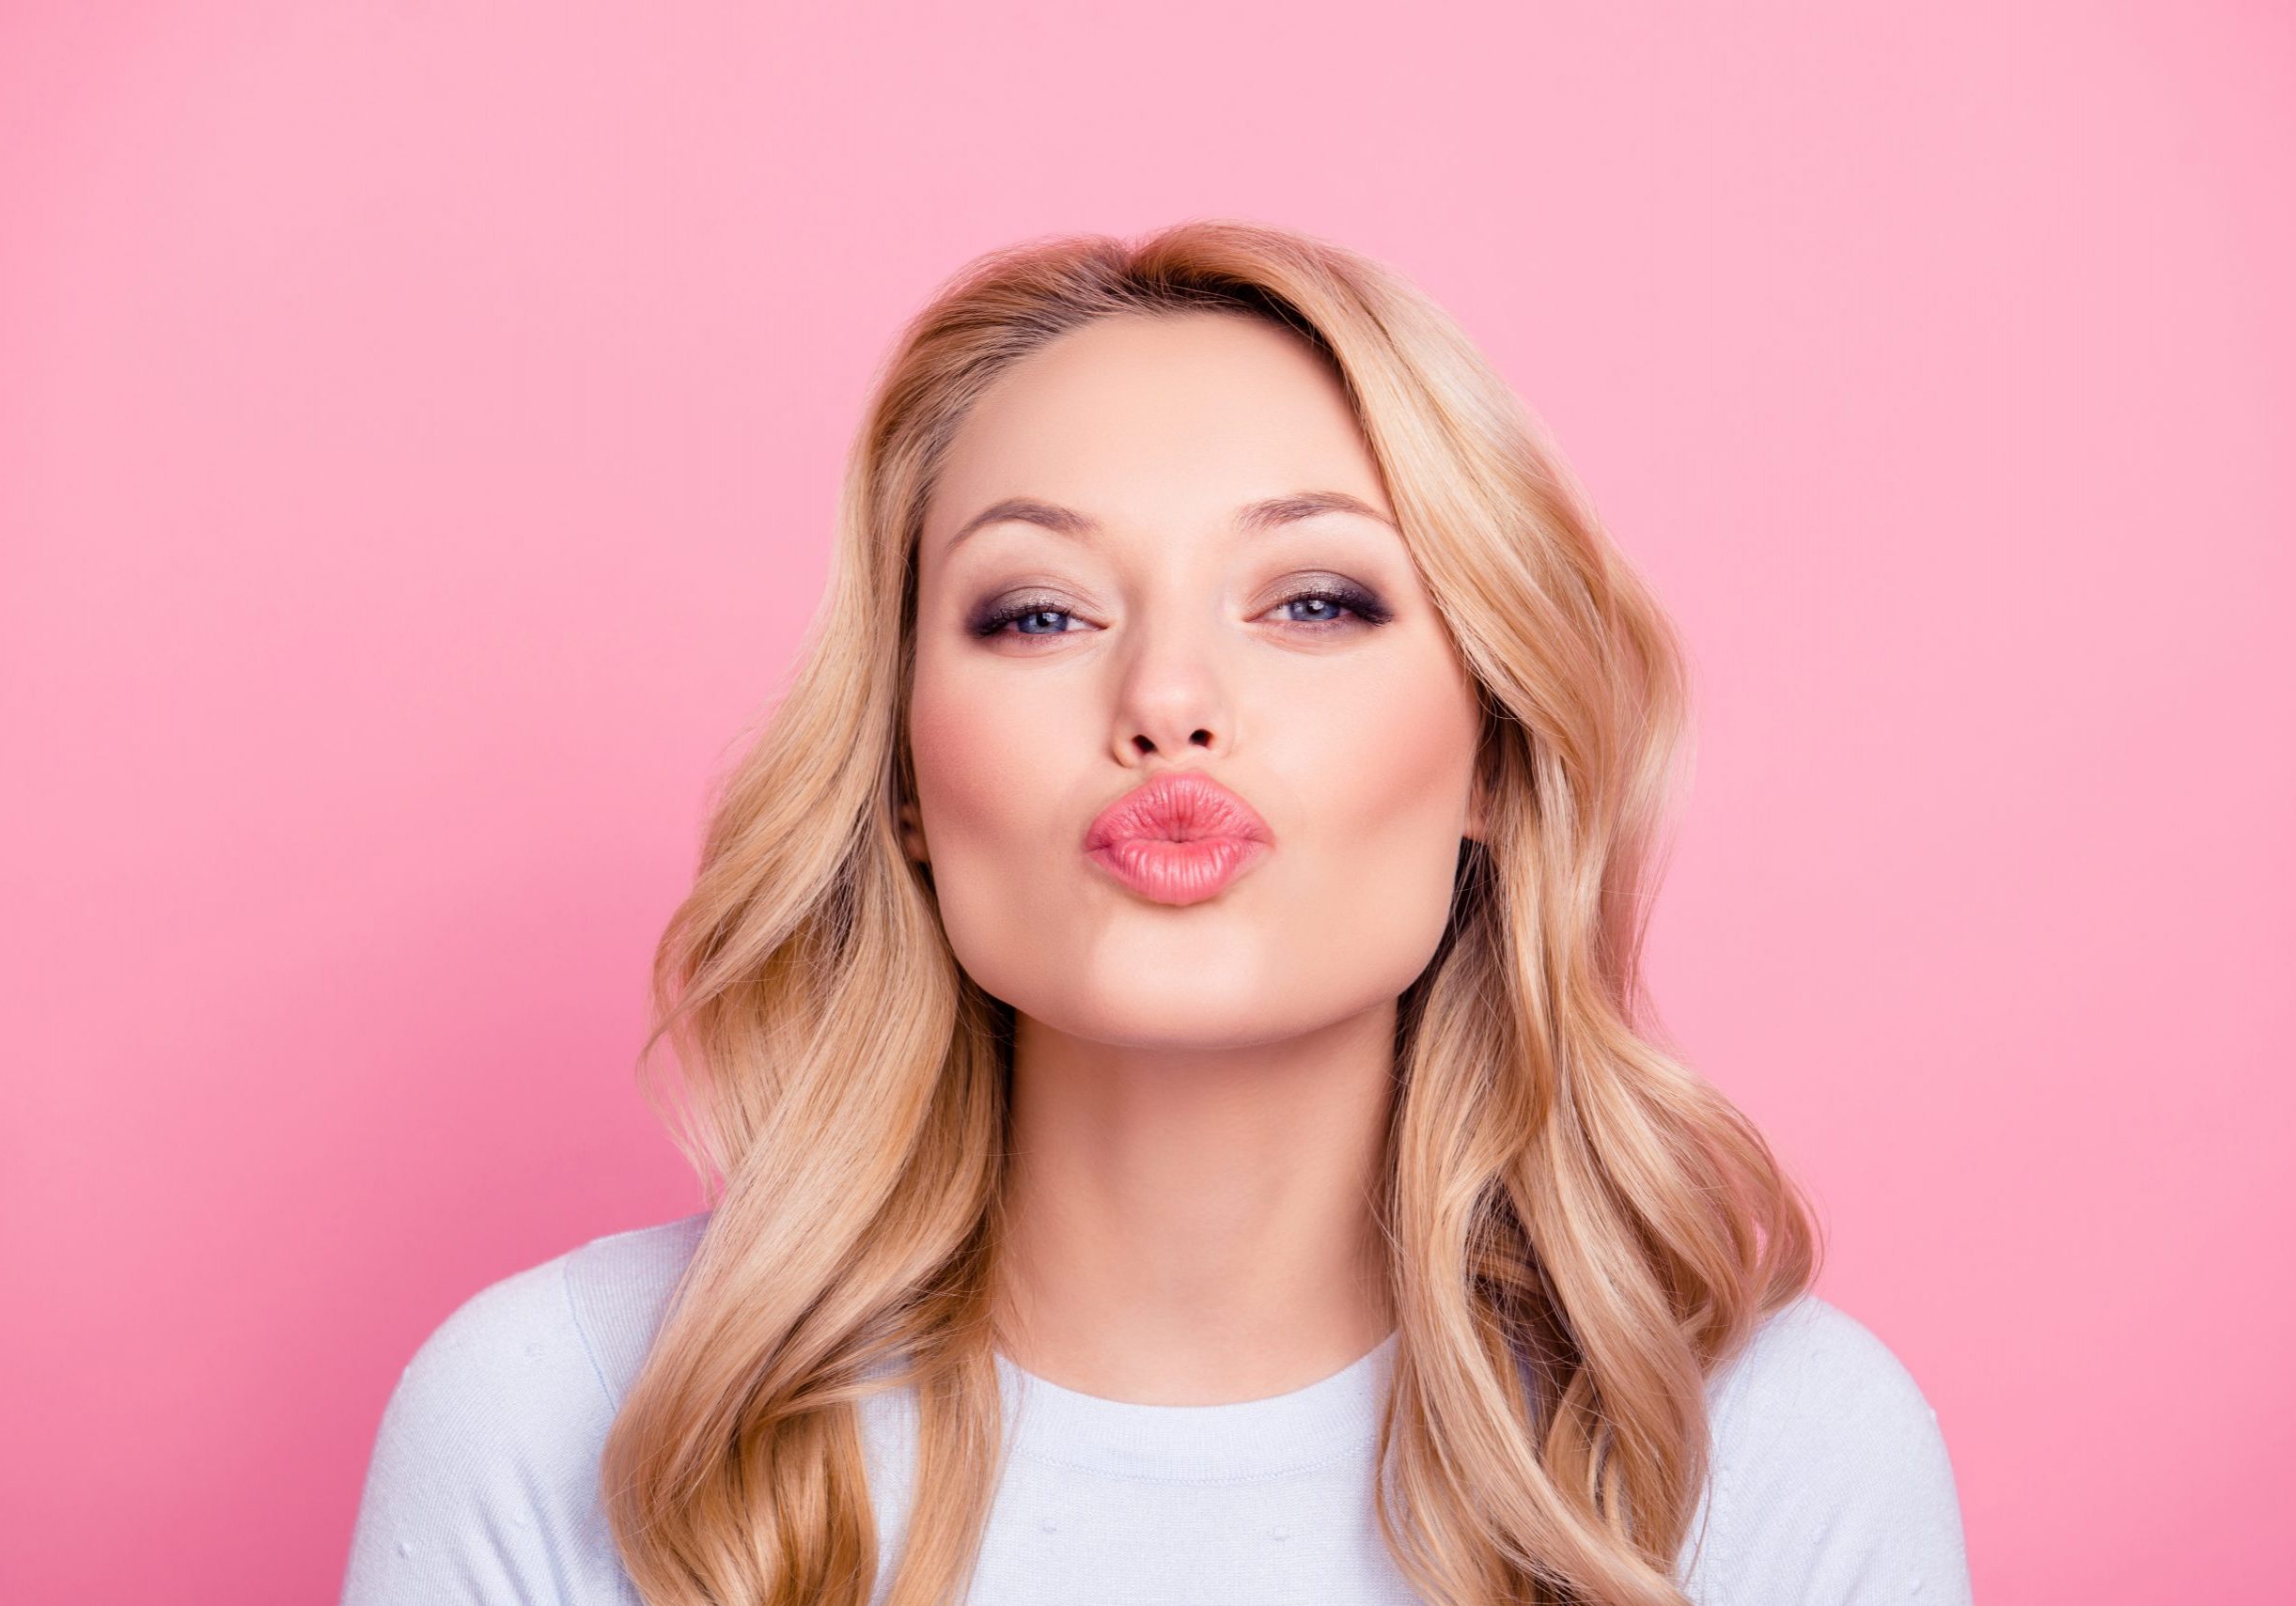 Portrait of cute lovely girl in casual outfit with modern hairdo sending blowing kiss with pout lips looking at camera isolated on pink background. Affection feelings concept